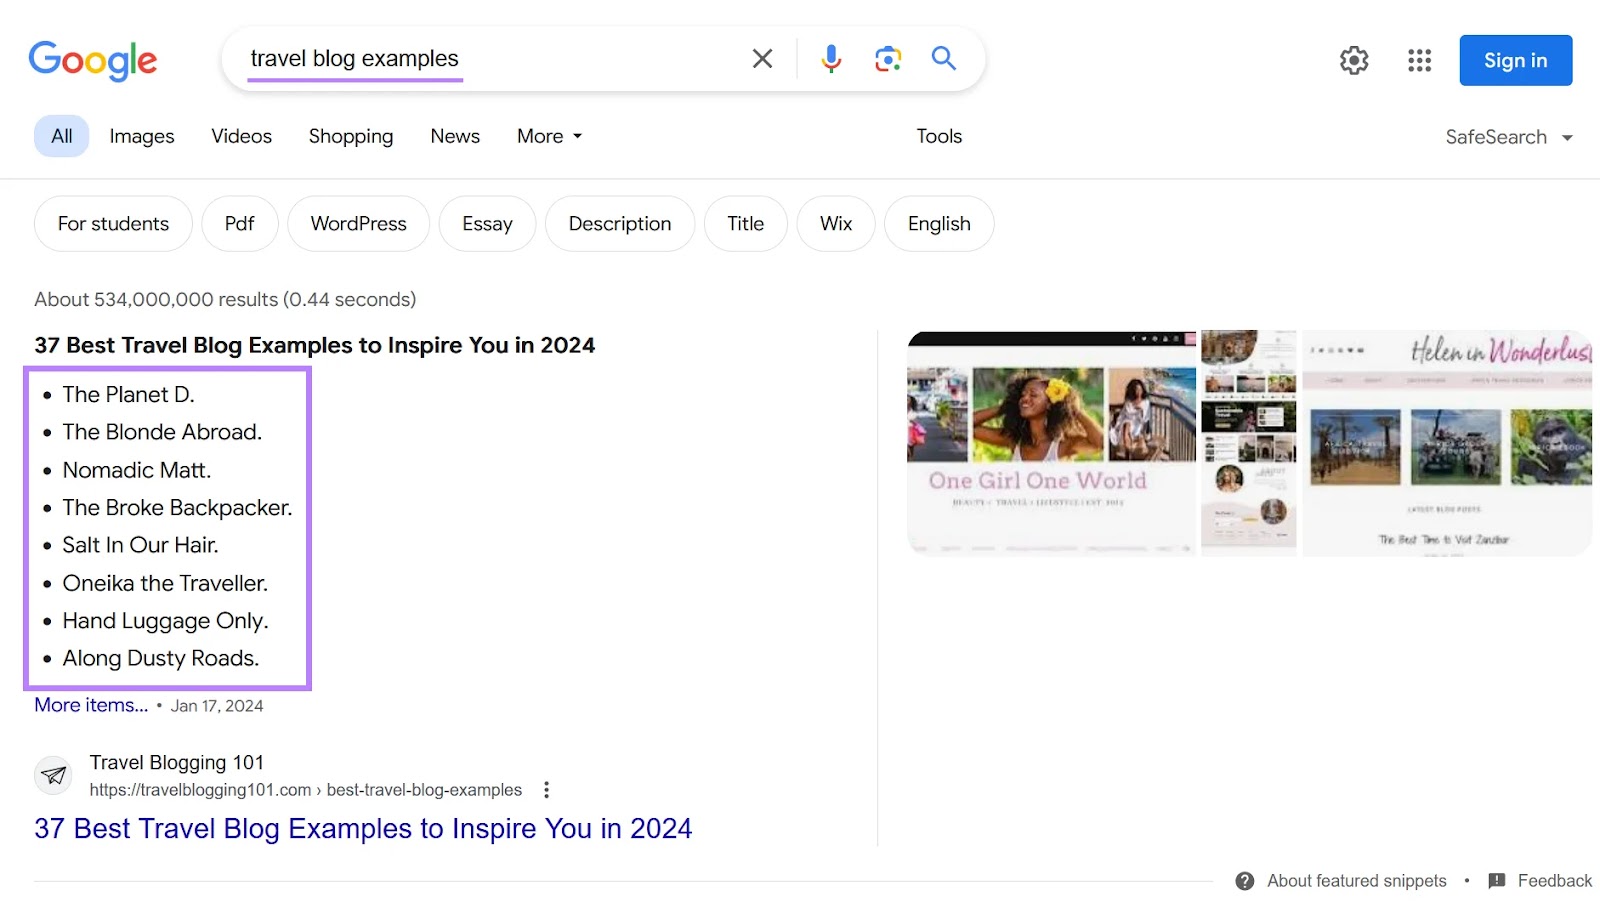 Featured snippet shown as a list in the Google Search Engine Results Page.